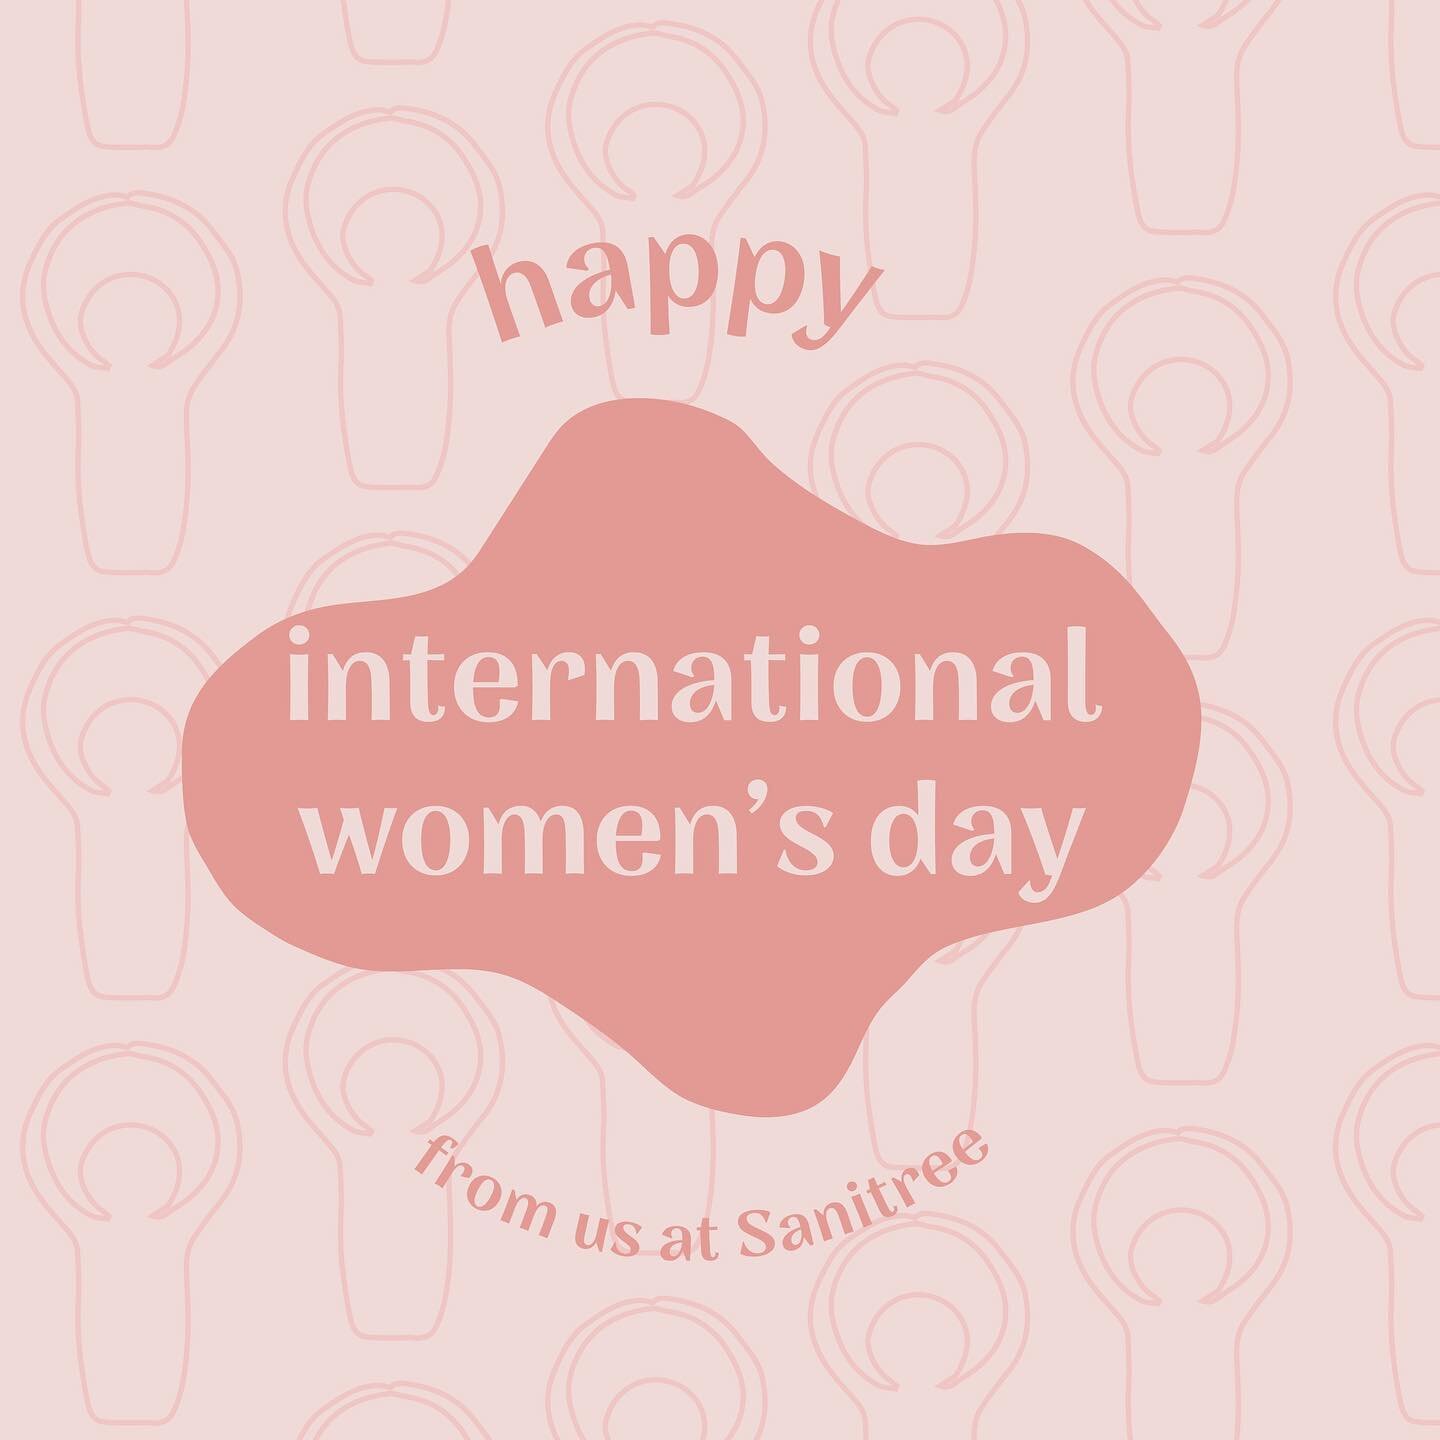 🩷HAPPY INTERNATIONAL WOMEN&rsquo;S DAY🩷

Our team at Sanitree is made up of some amazing women that we want to celebrate !! 

Inspiring, empowering and educating menstruators to tackle period poverty is at the core of Sanitree✨

Today has been a ch